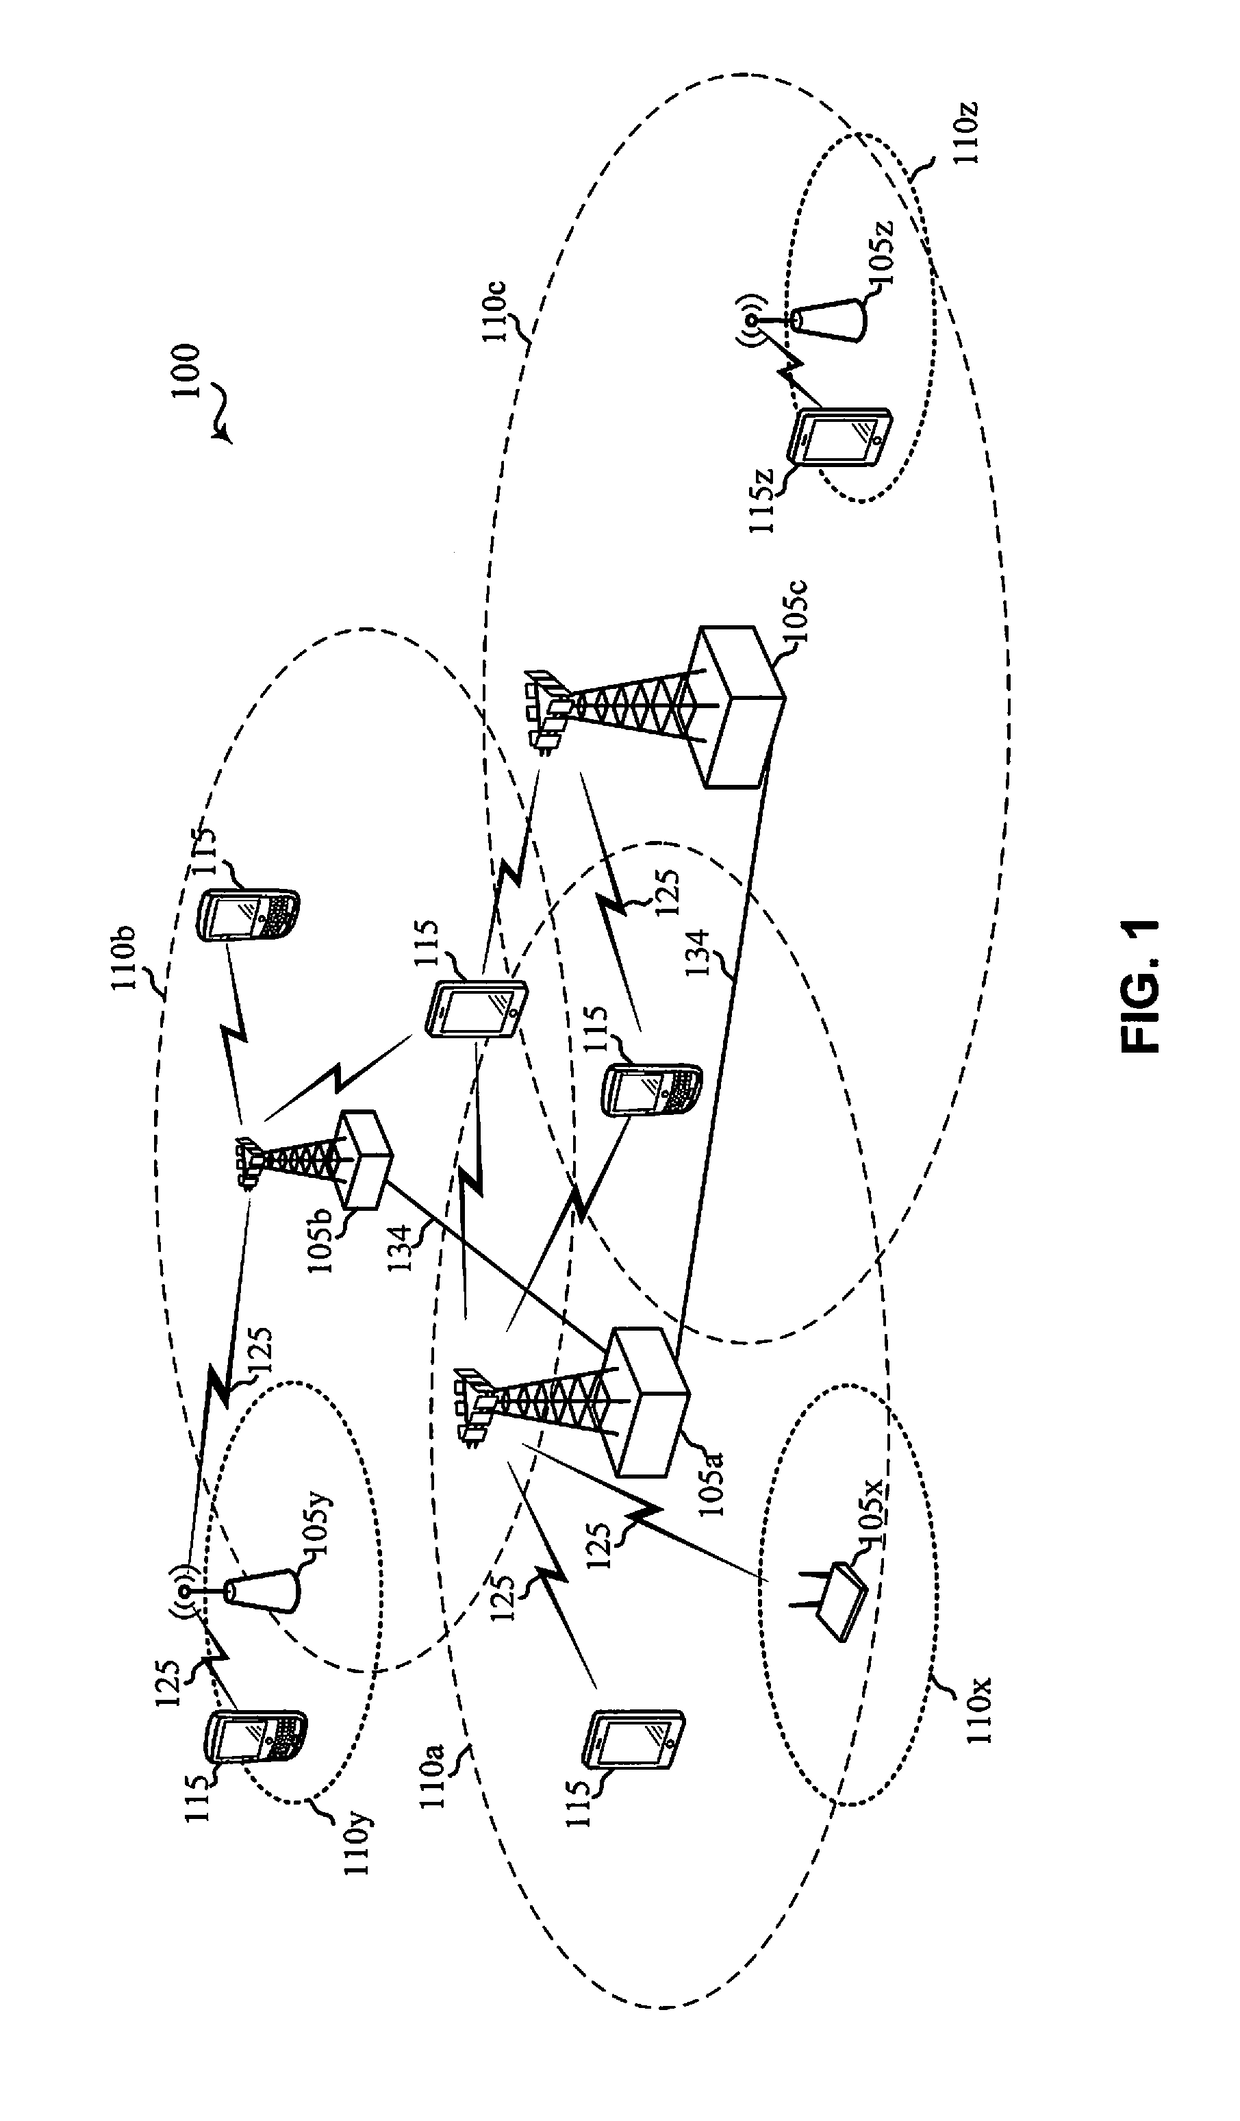 Control resource set group design for improved communications devices, systems, and networks